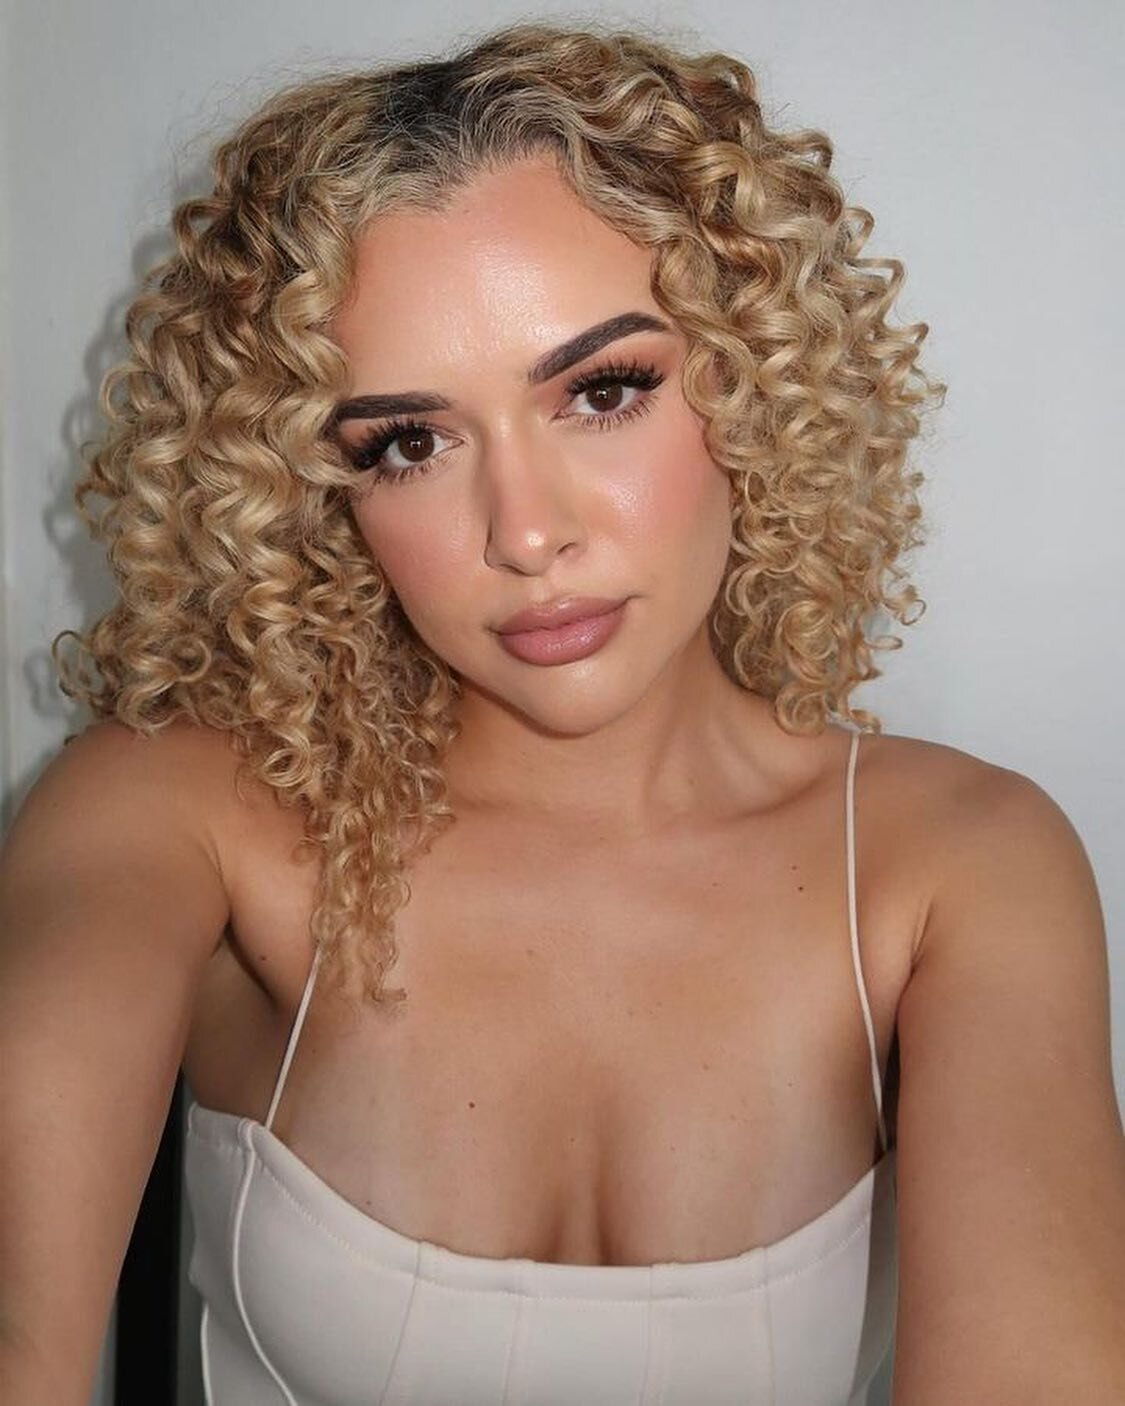 @alexiusmariee is looking 🔥 in her fresh new blonde #AustinCurls! We&rsquo;re in the process of transforming her hair from a level 9 orange to a stunning level 11 blonde, using bleach and neutralizing any orange tones for a cooler, blonde, beige hue